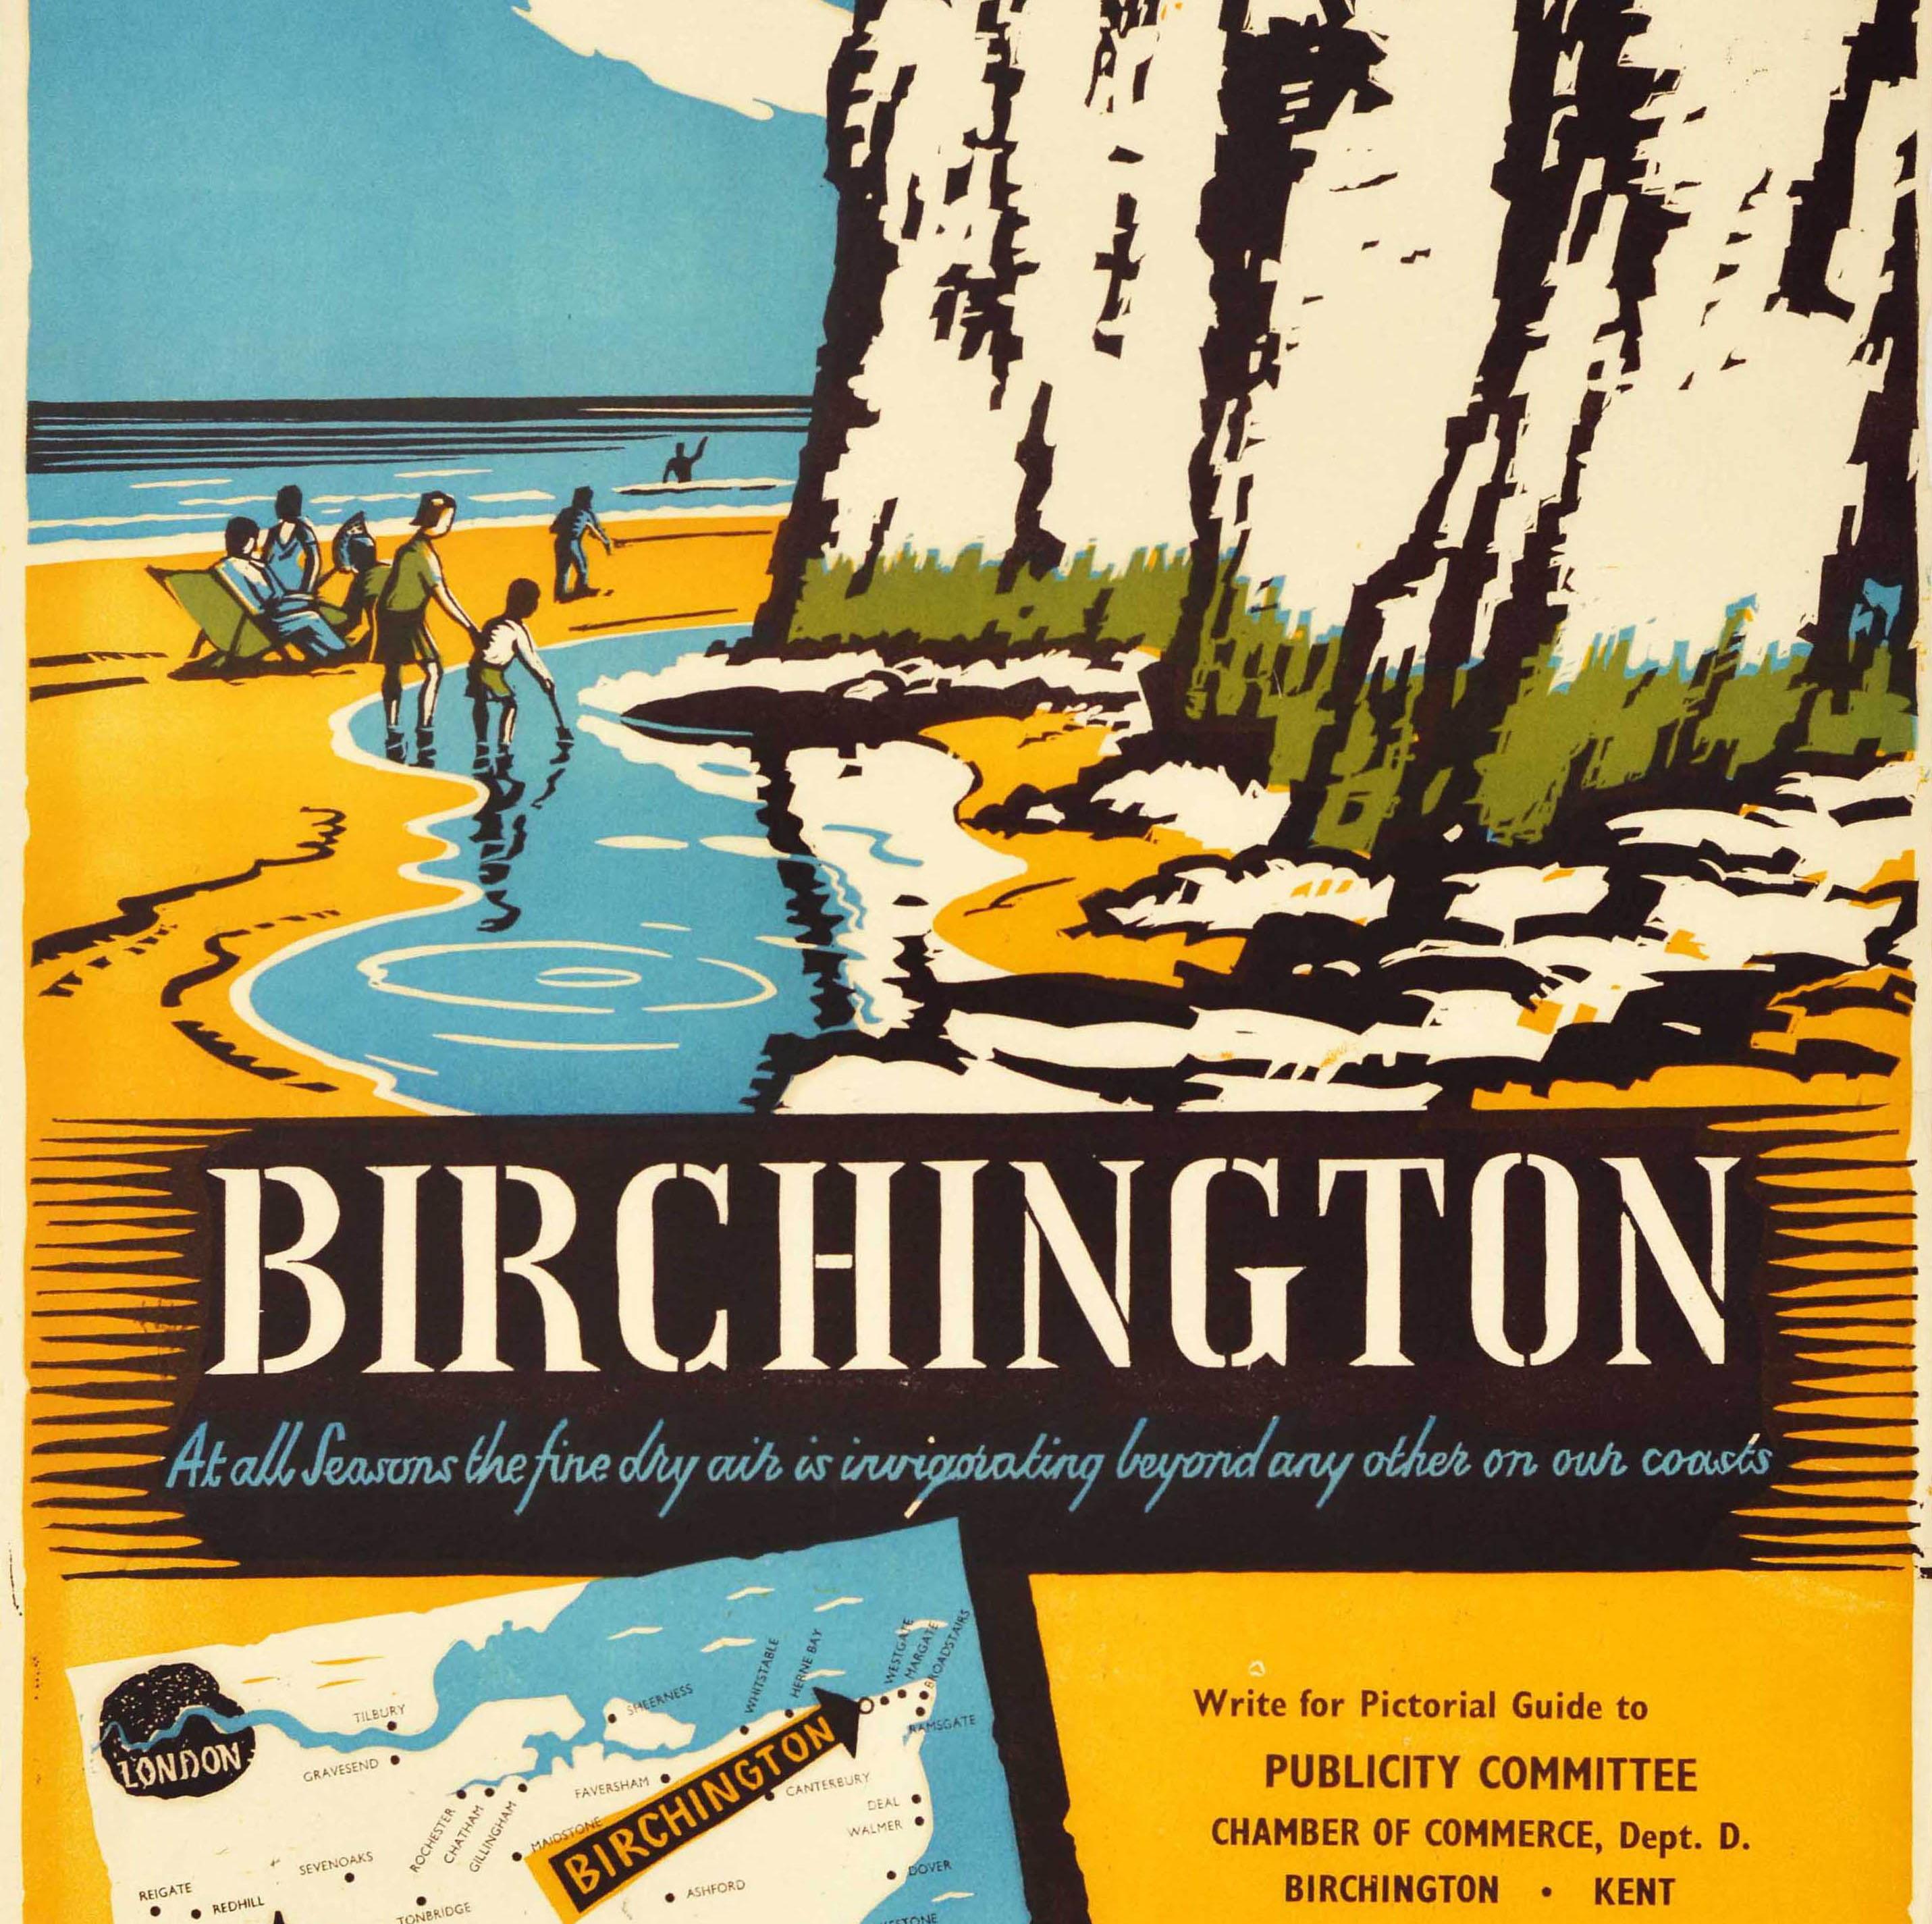 Original vintage travel poster for the Kent seaside resort of Birchington - At all Seasons the fine dry air is invigorating beyond any other on our coasts - featuring a colourful illustration by David William Burley (1901-1991) of holidaymakers on a